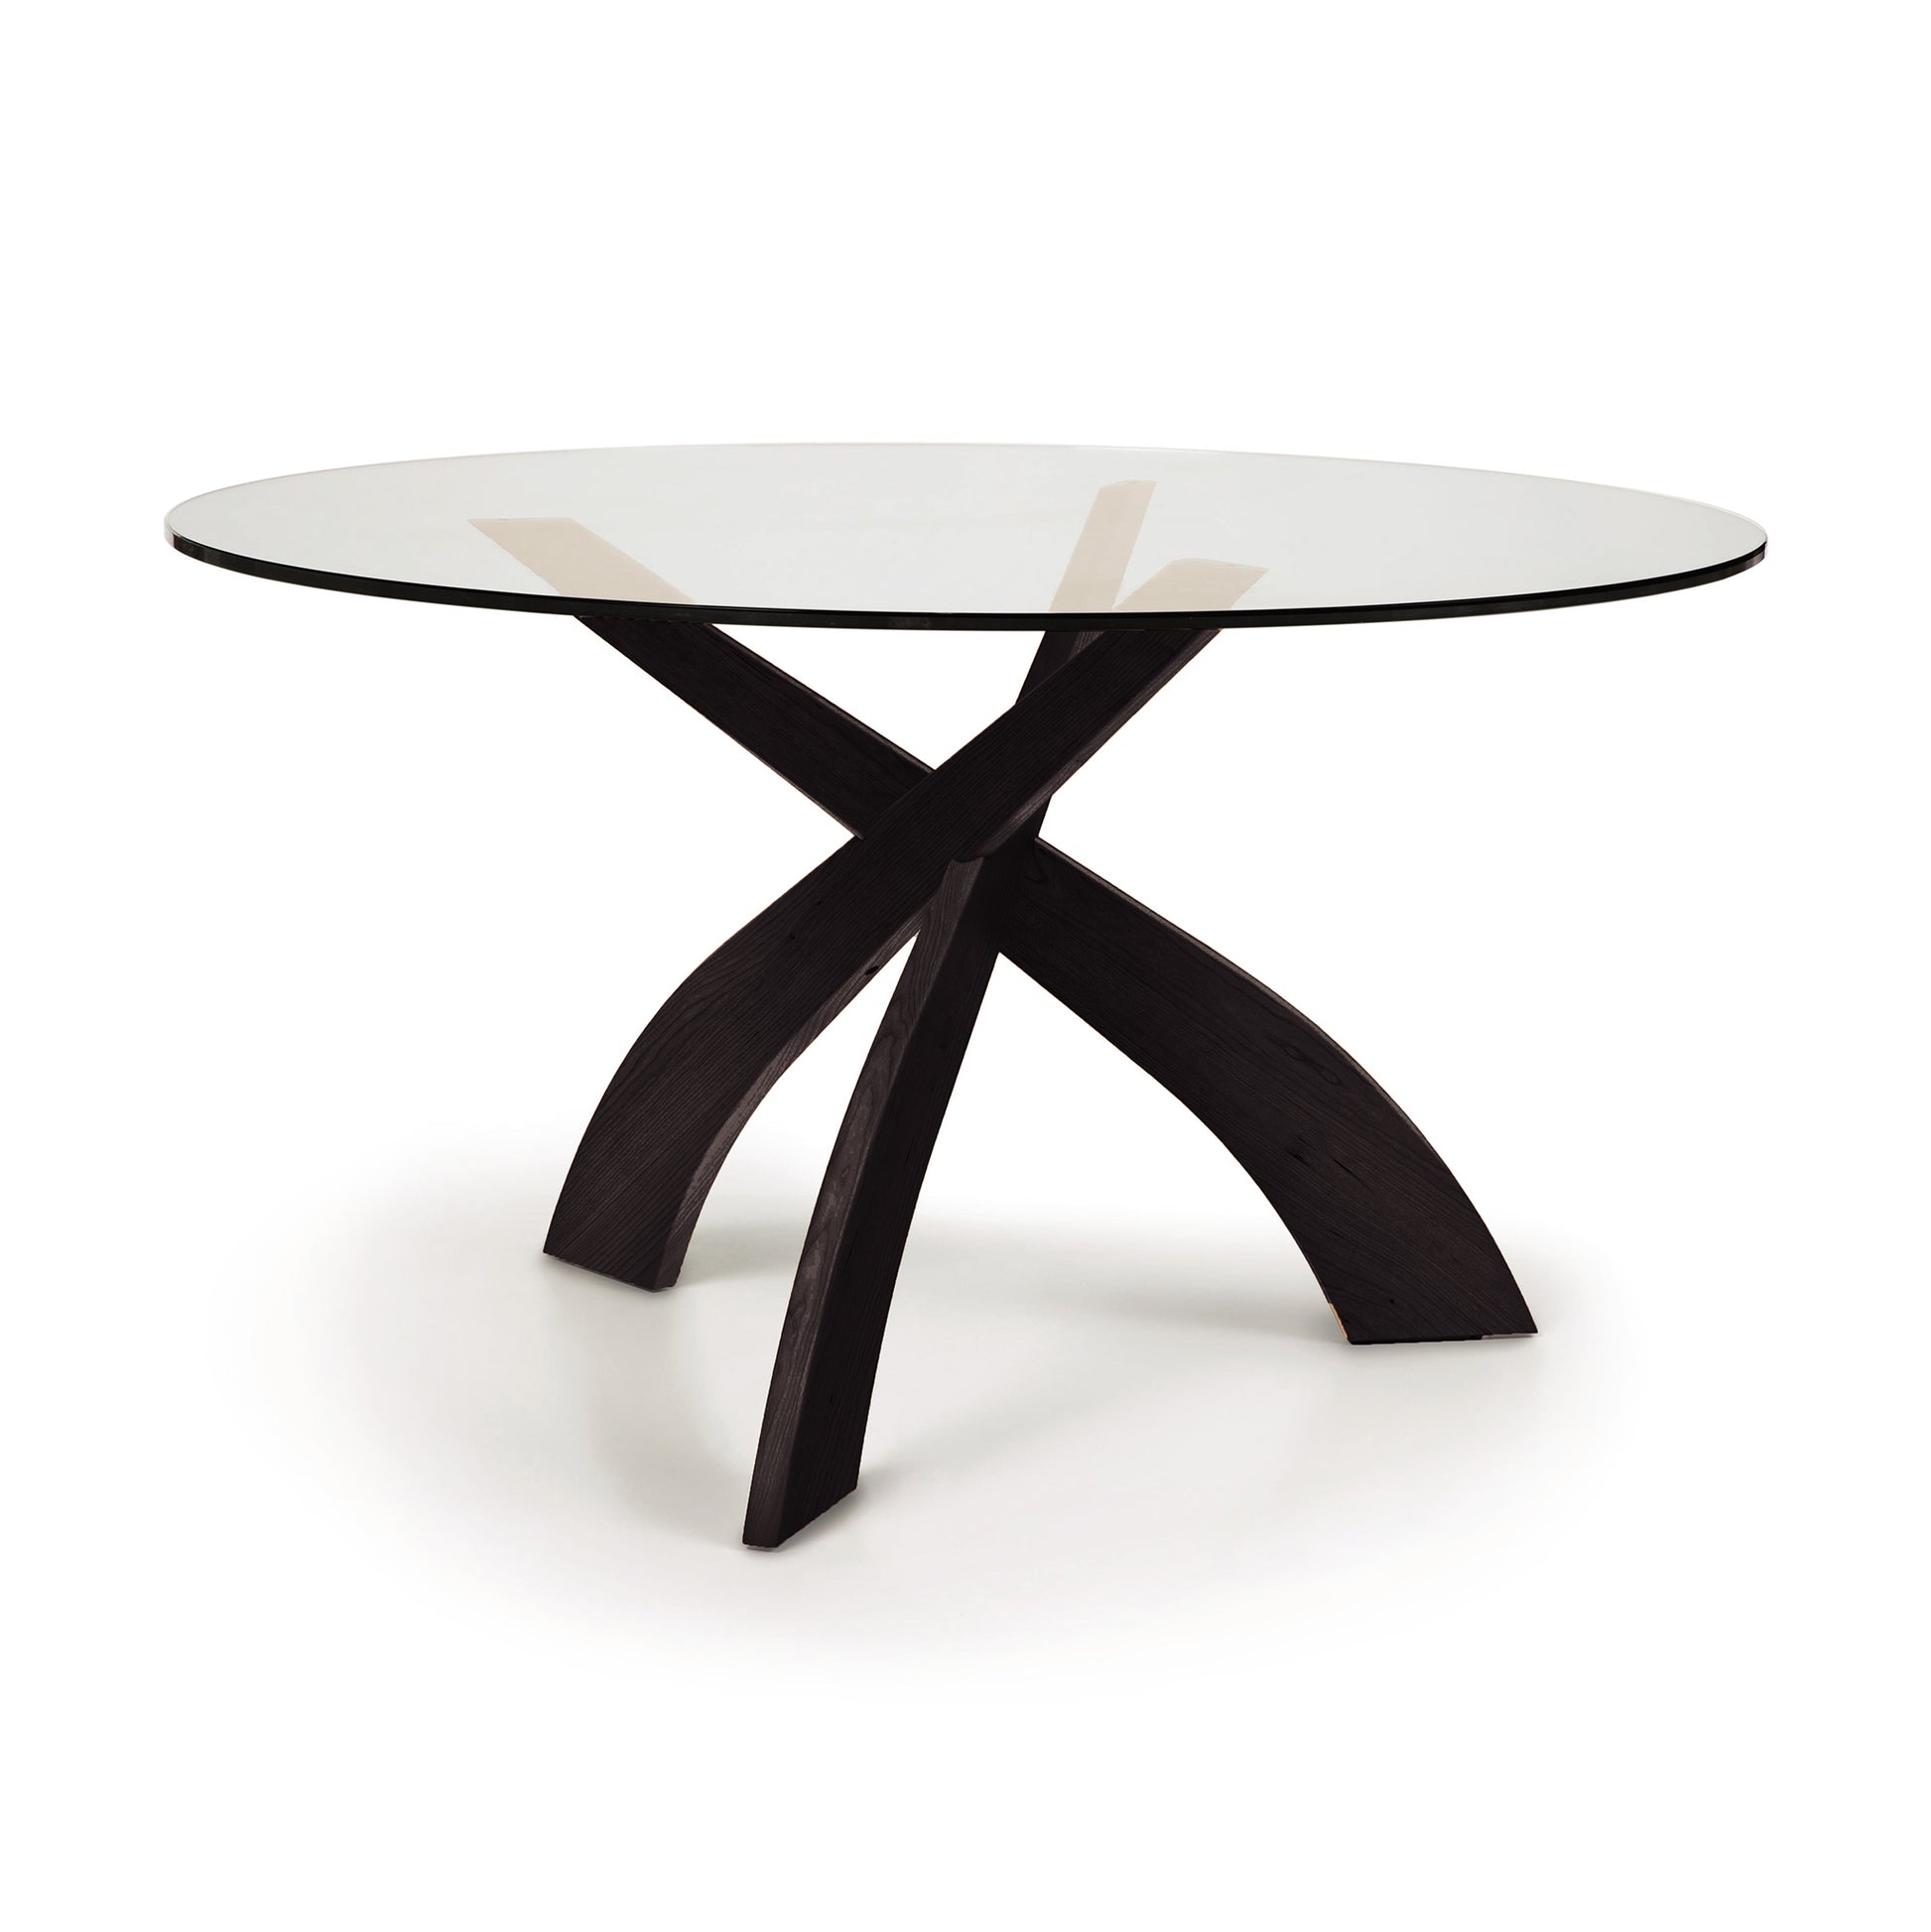 A Entwine Round Glass Top Dining Table with a dark sustainably sourced cherry wood base featuring intersecting legs on a white background.